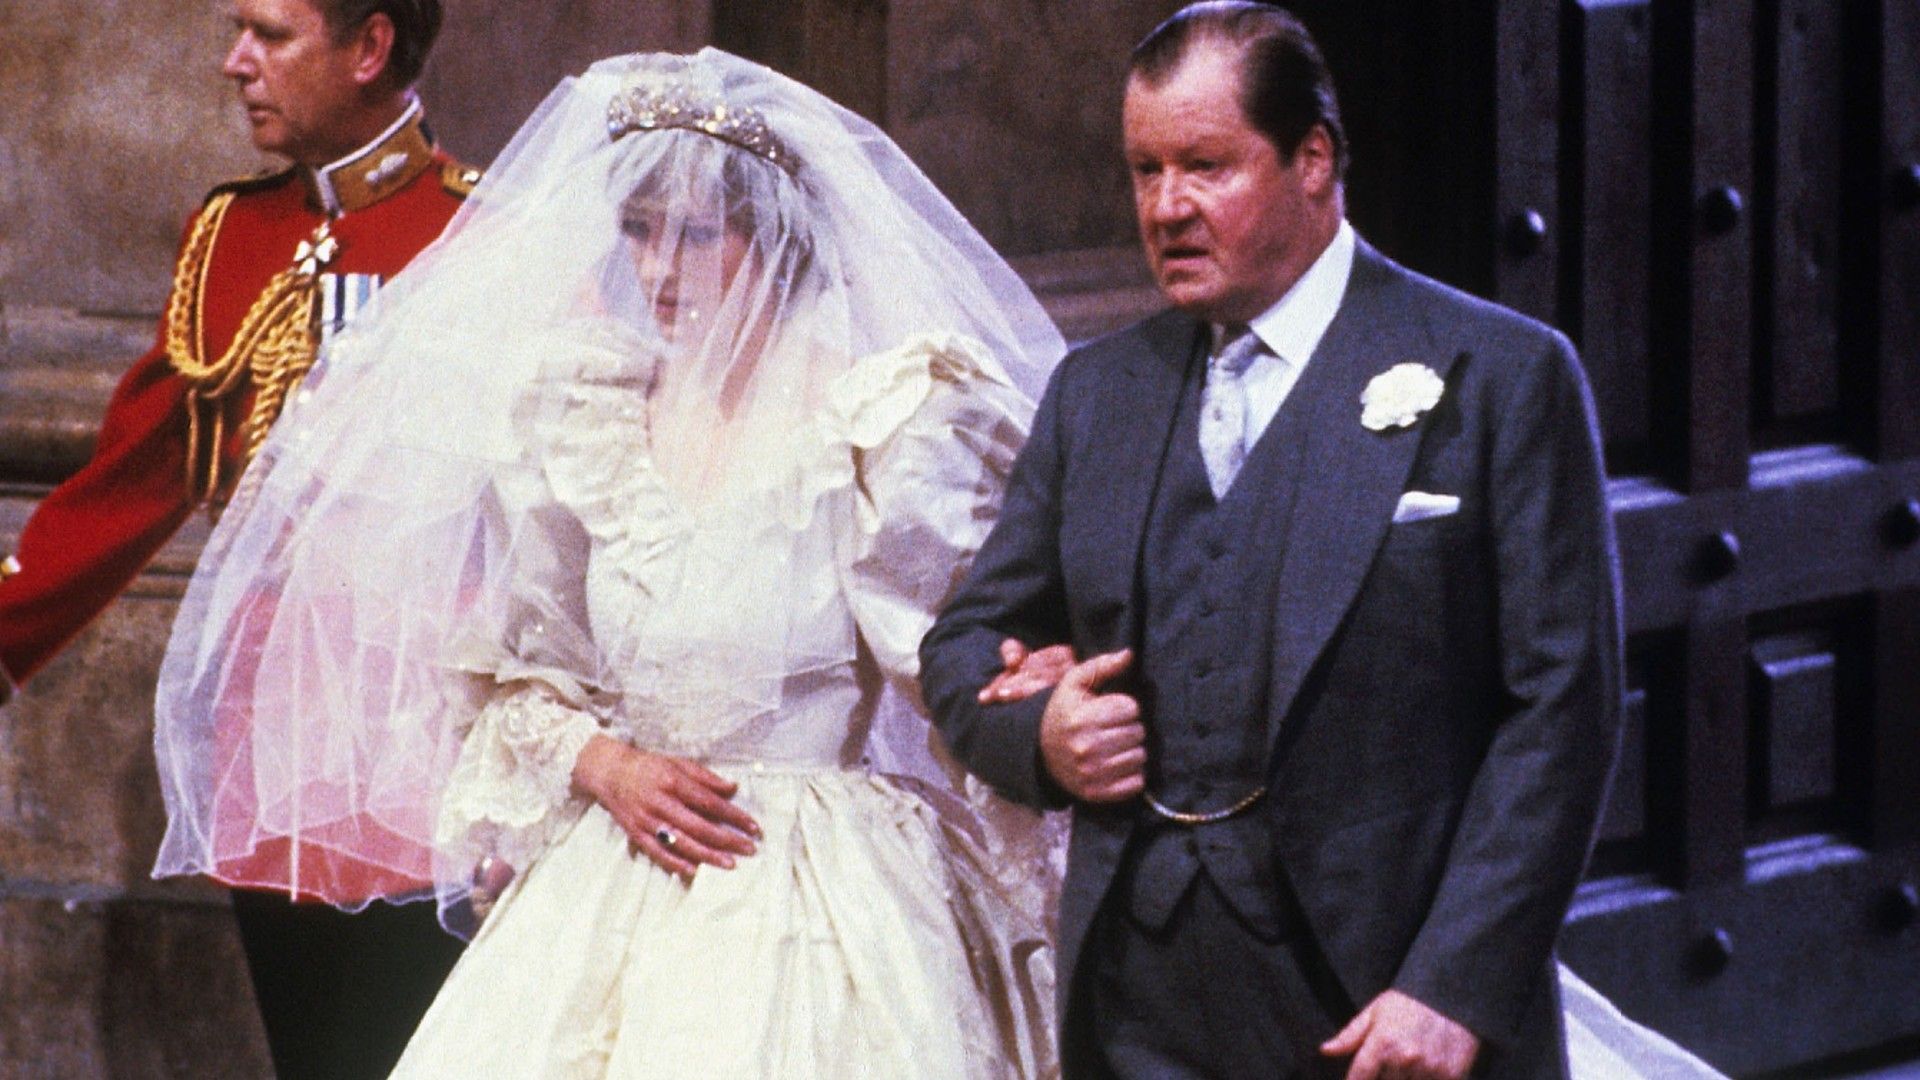 <p>                     We can all forgive a royal bride for feeling more than a little nervous before her wedding, so it comes as no surprise that Diana experienced an unfortunate moment on the morning of her July 1981 wedding to Prince Charles.                   </p>                                      <p>                     It’s reported that when Diana went to spritz on some perfume at Clarence House, before her wedding, she accidentally ended up spilling some on her dress, causing a visible stain on the gown. In Rosalind Coward’s book <em>Diana: The Portrait</em>, the late Princess’ make-up artist Barbara Daly explained that Diana had chosen the floral Quelques Fleurs perfume for her big day, which eventually spilt on her dress.                   </p>                                      <p>                     Fortunately, she came up with a deft solution to the problem and simply placed her hand over the stain as she walked up the aisle, making it look as if she was just holding her dress.                   </p>